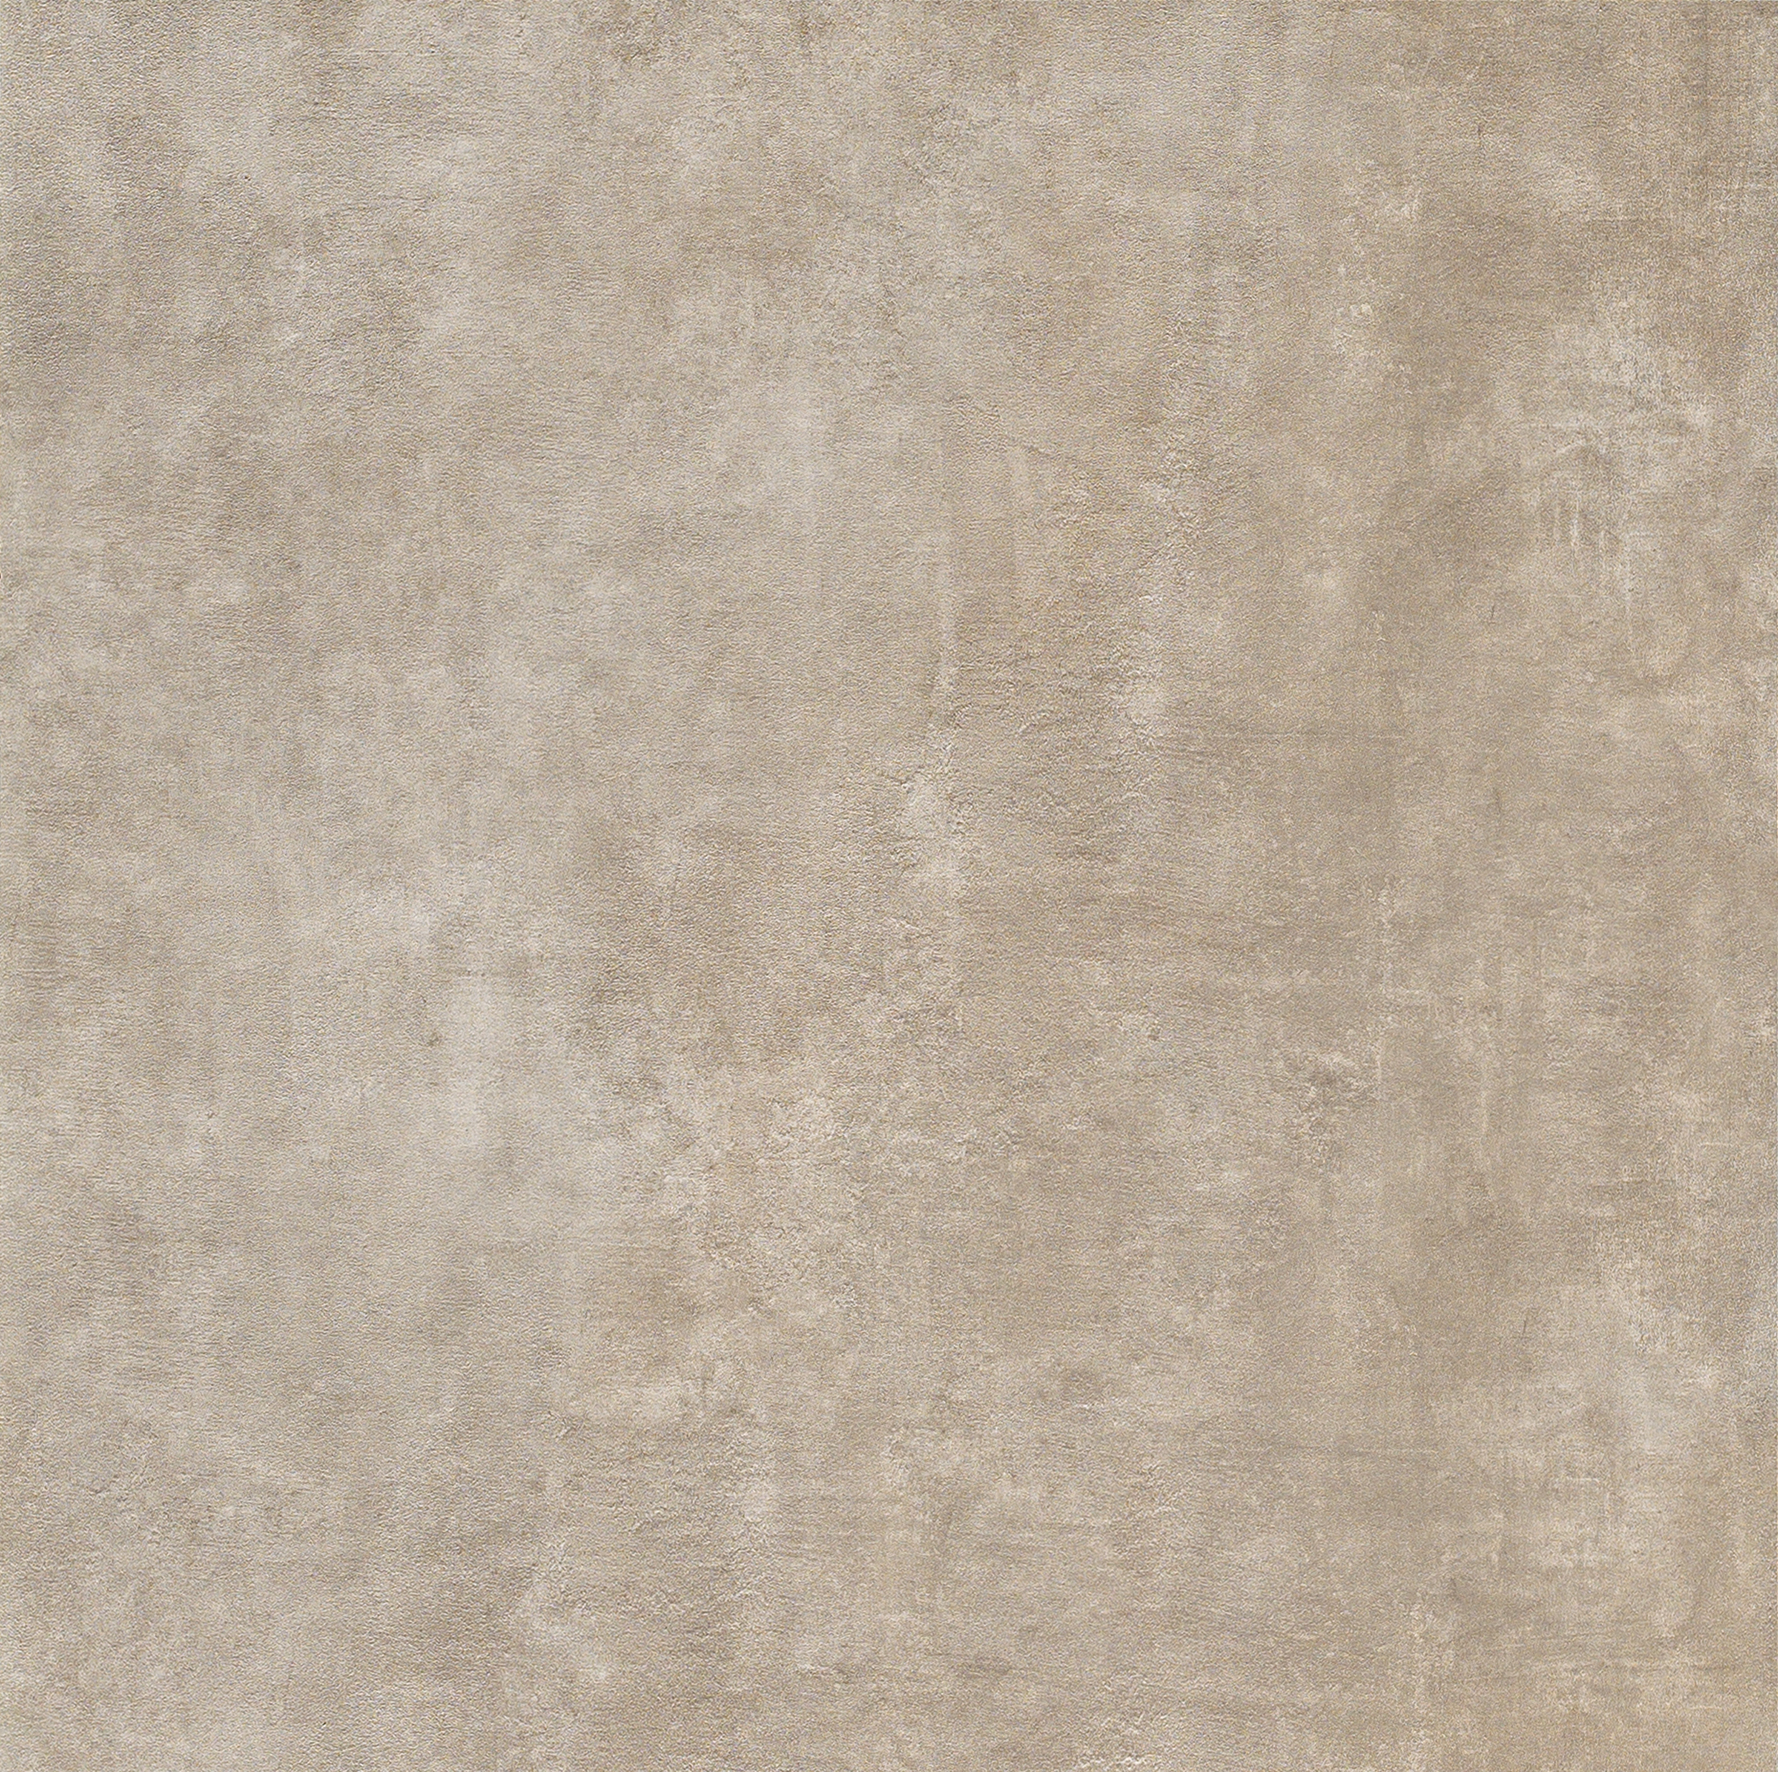 Unicom Starker Icon Taupe Naturale 7970 120x120cm rectified 10mm